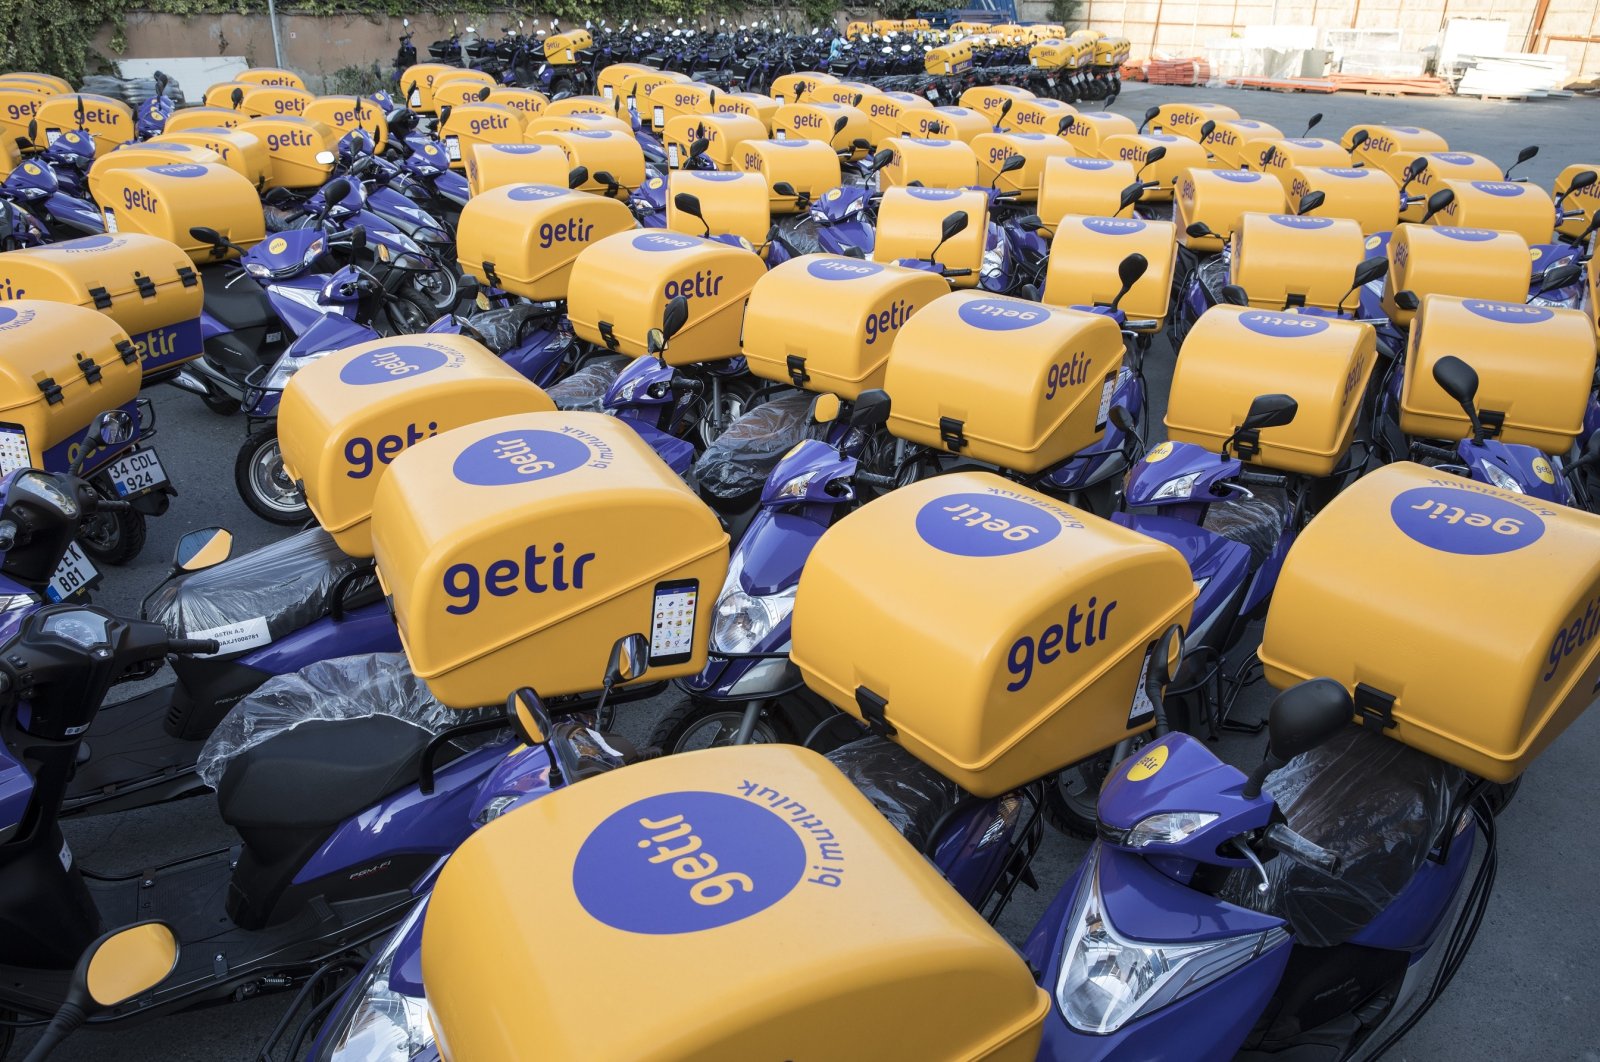 Brand new Getir scooters ready to be put into service in Istanbul, Turkey. (Courtesy of Getir)